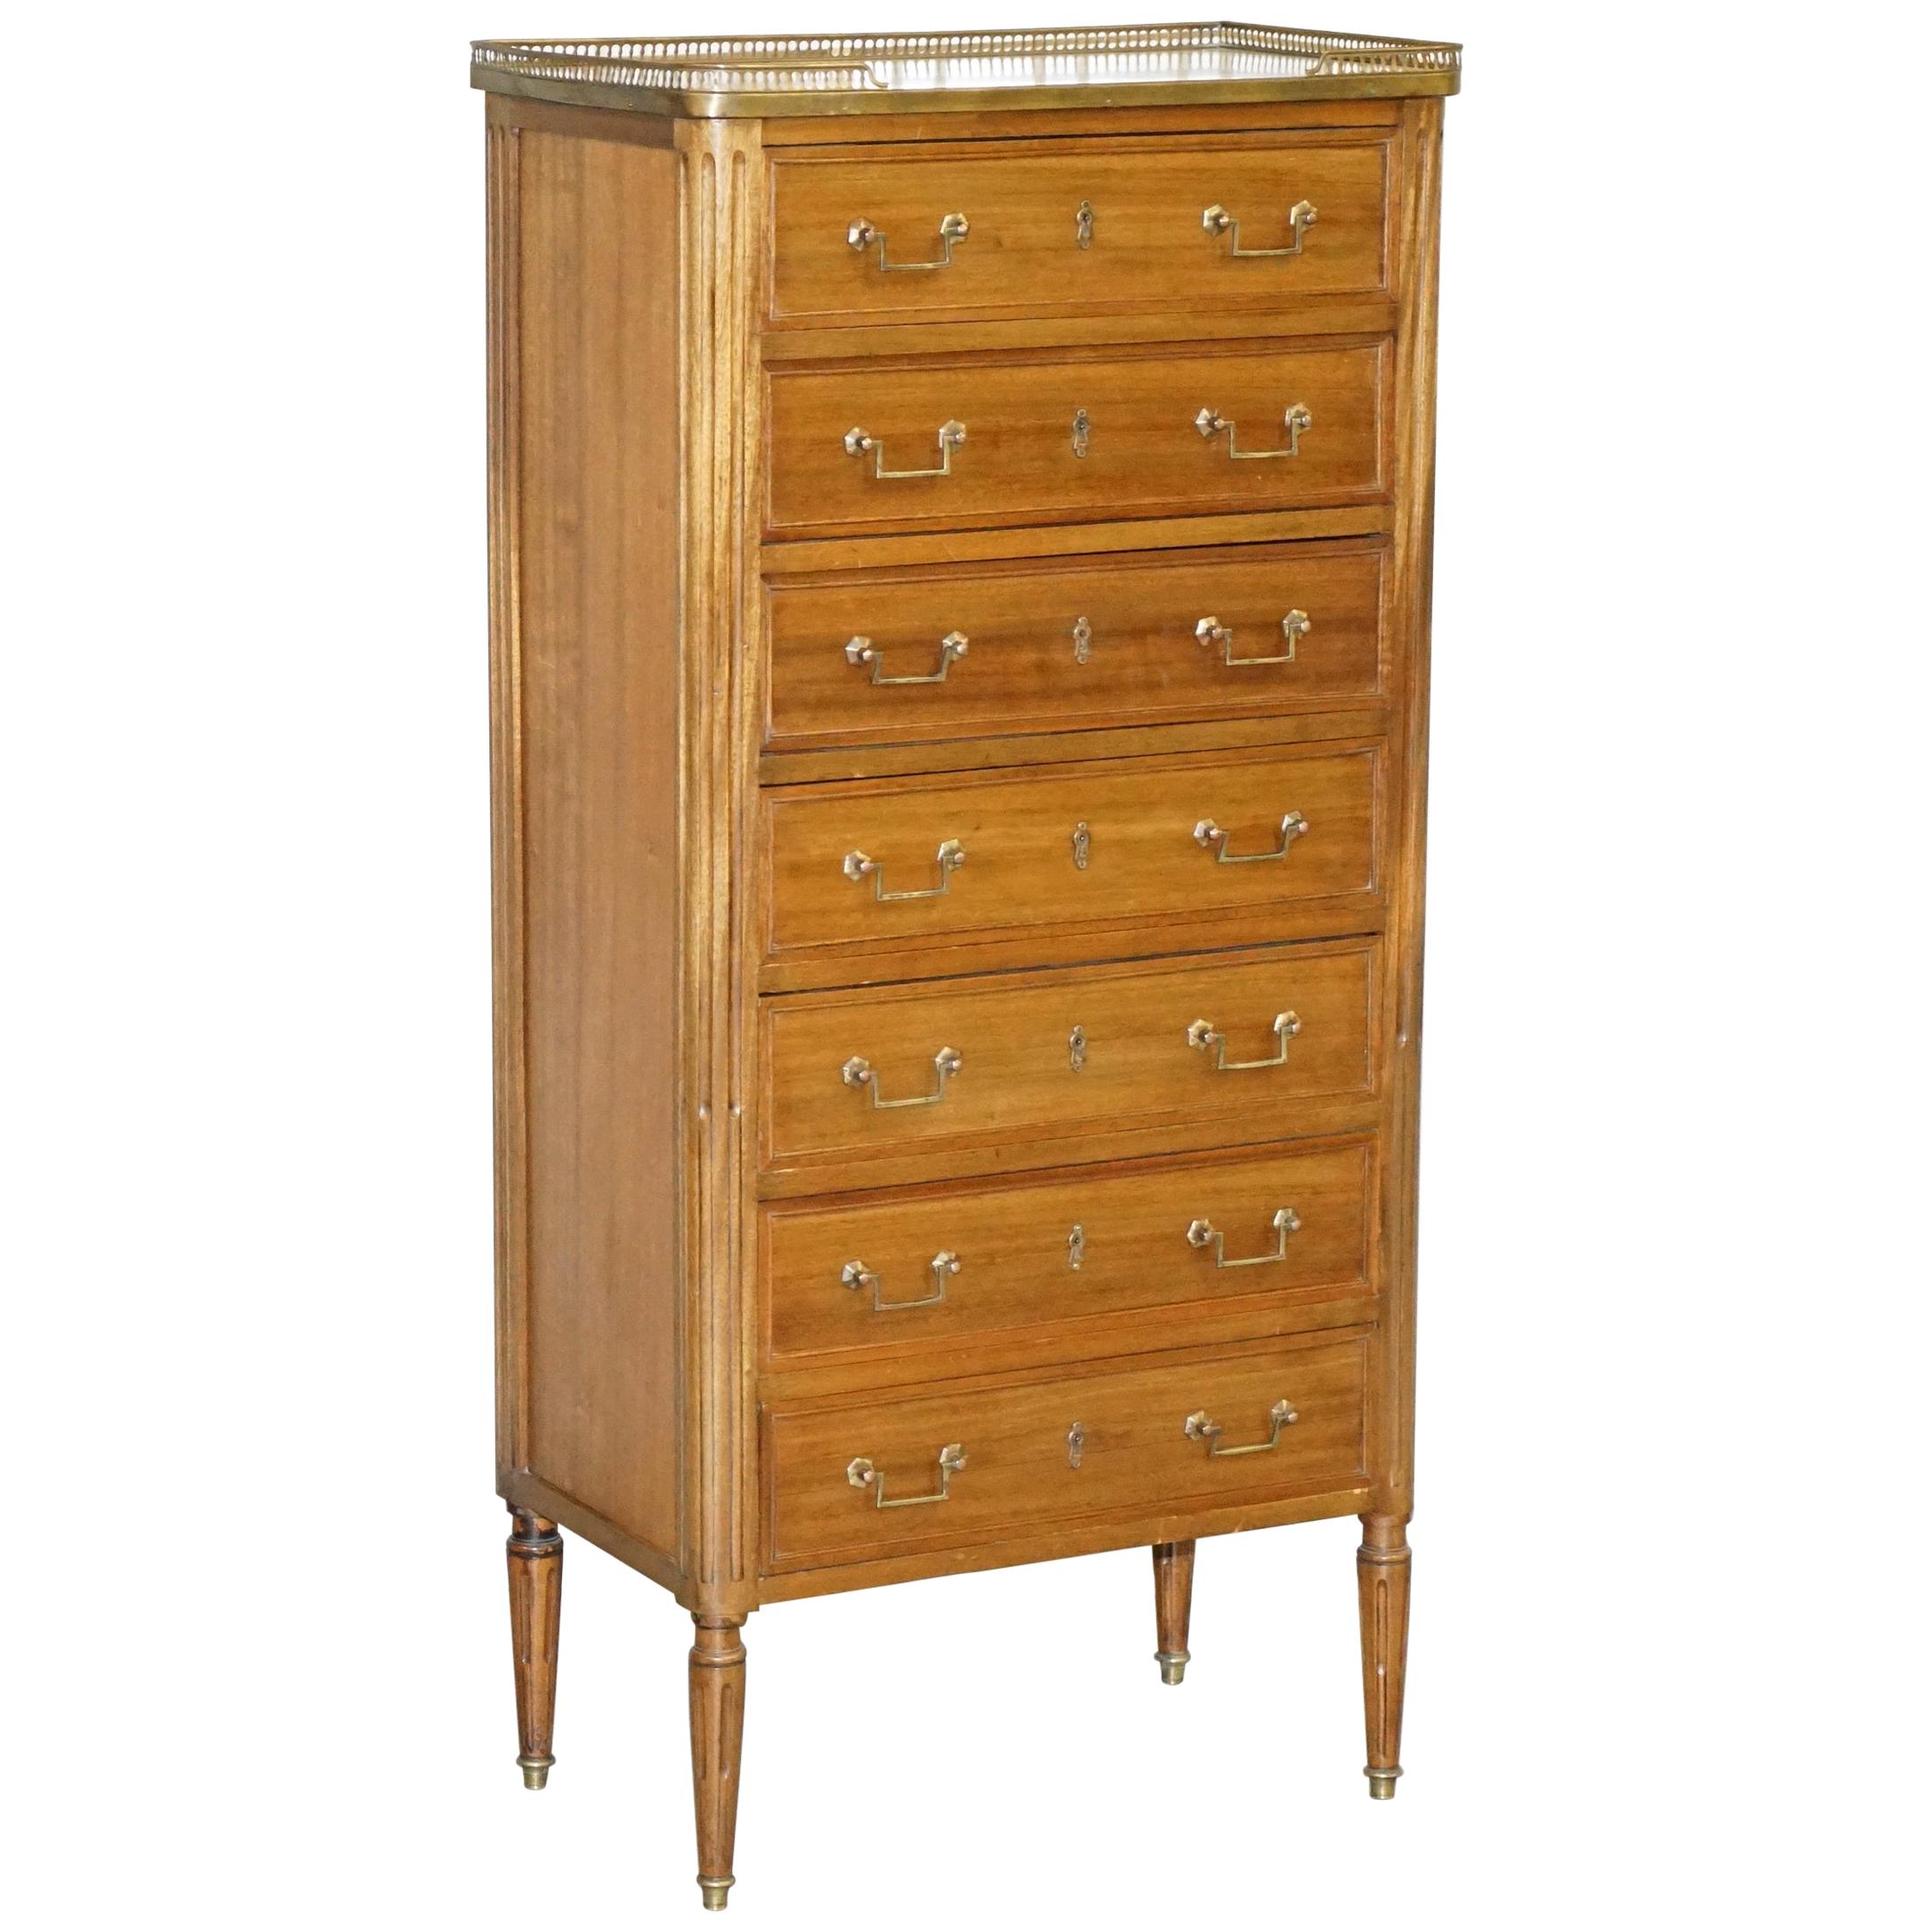 Rare 19th Century French Marble Topped Brass Gallery Semainier Chest of Drawers For Sale